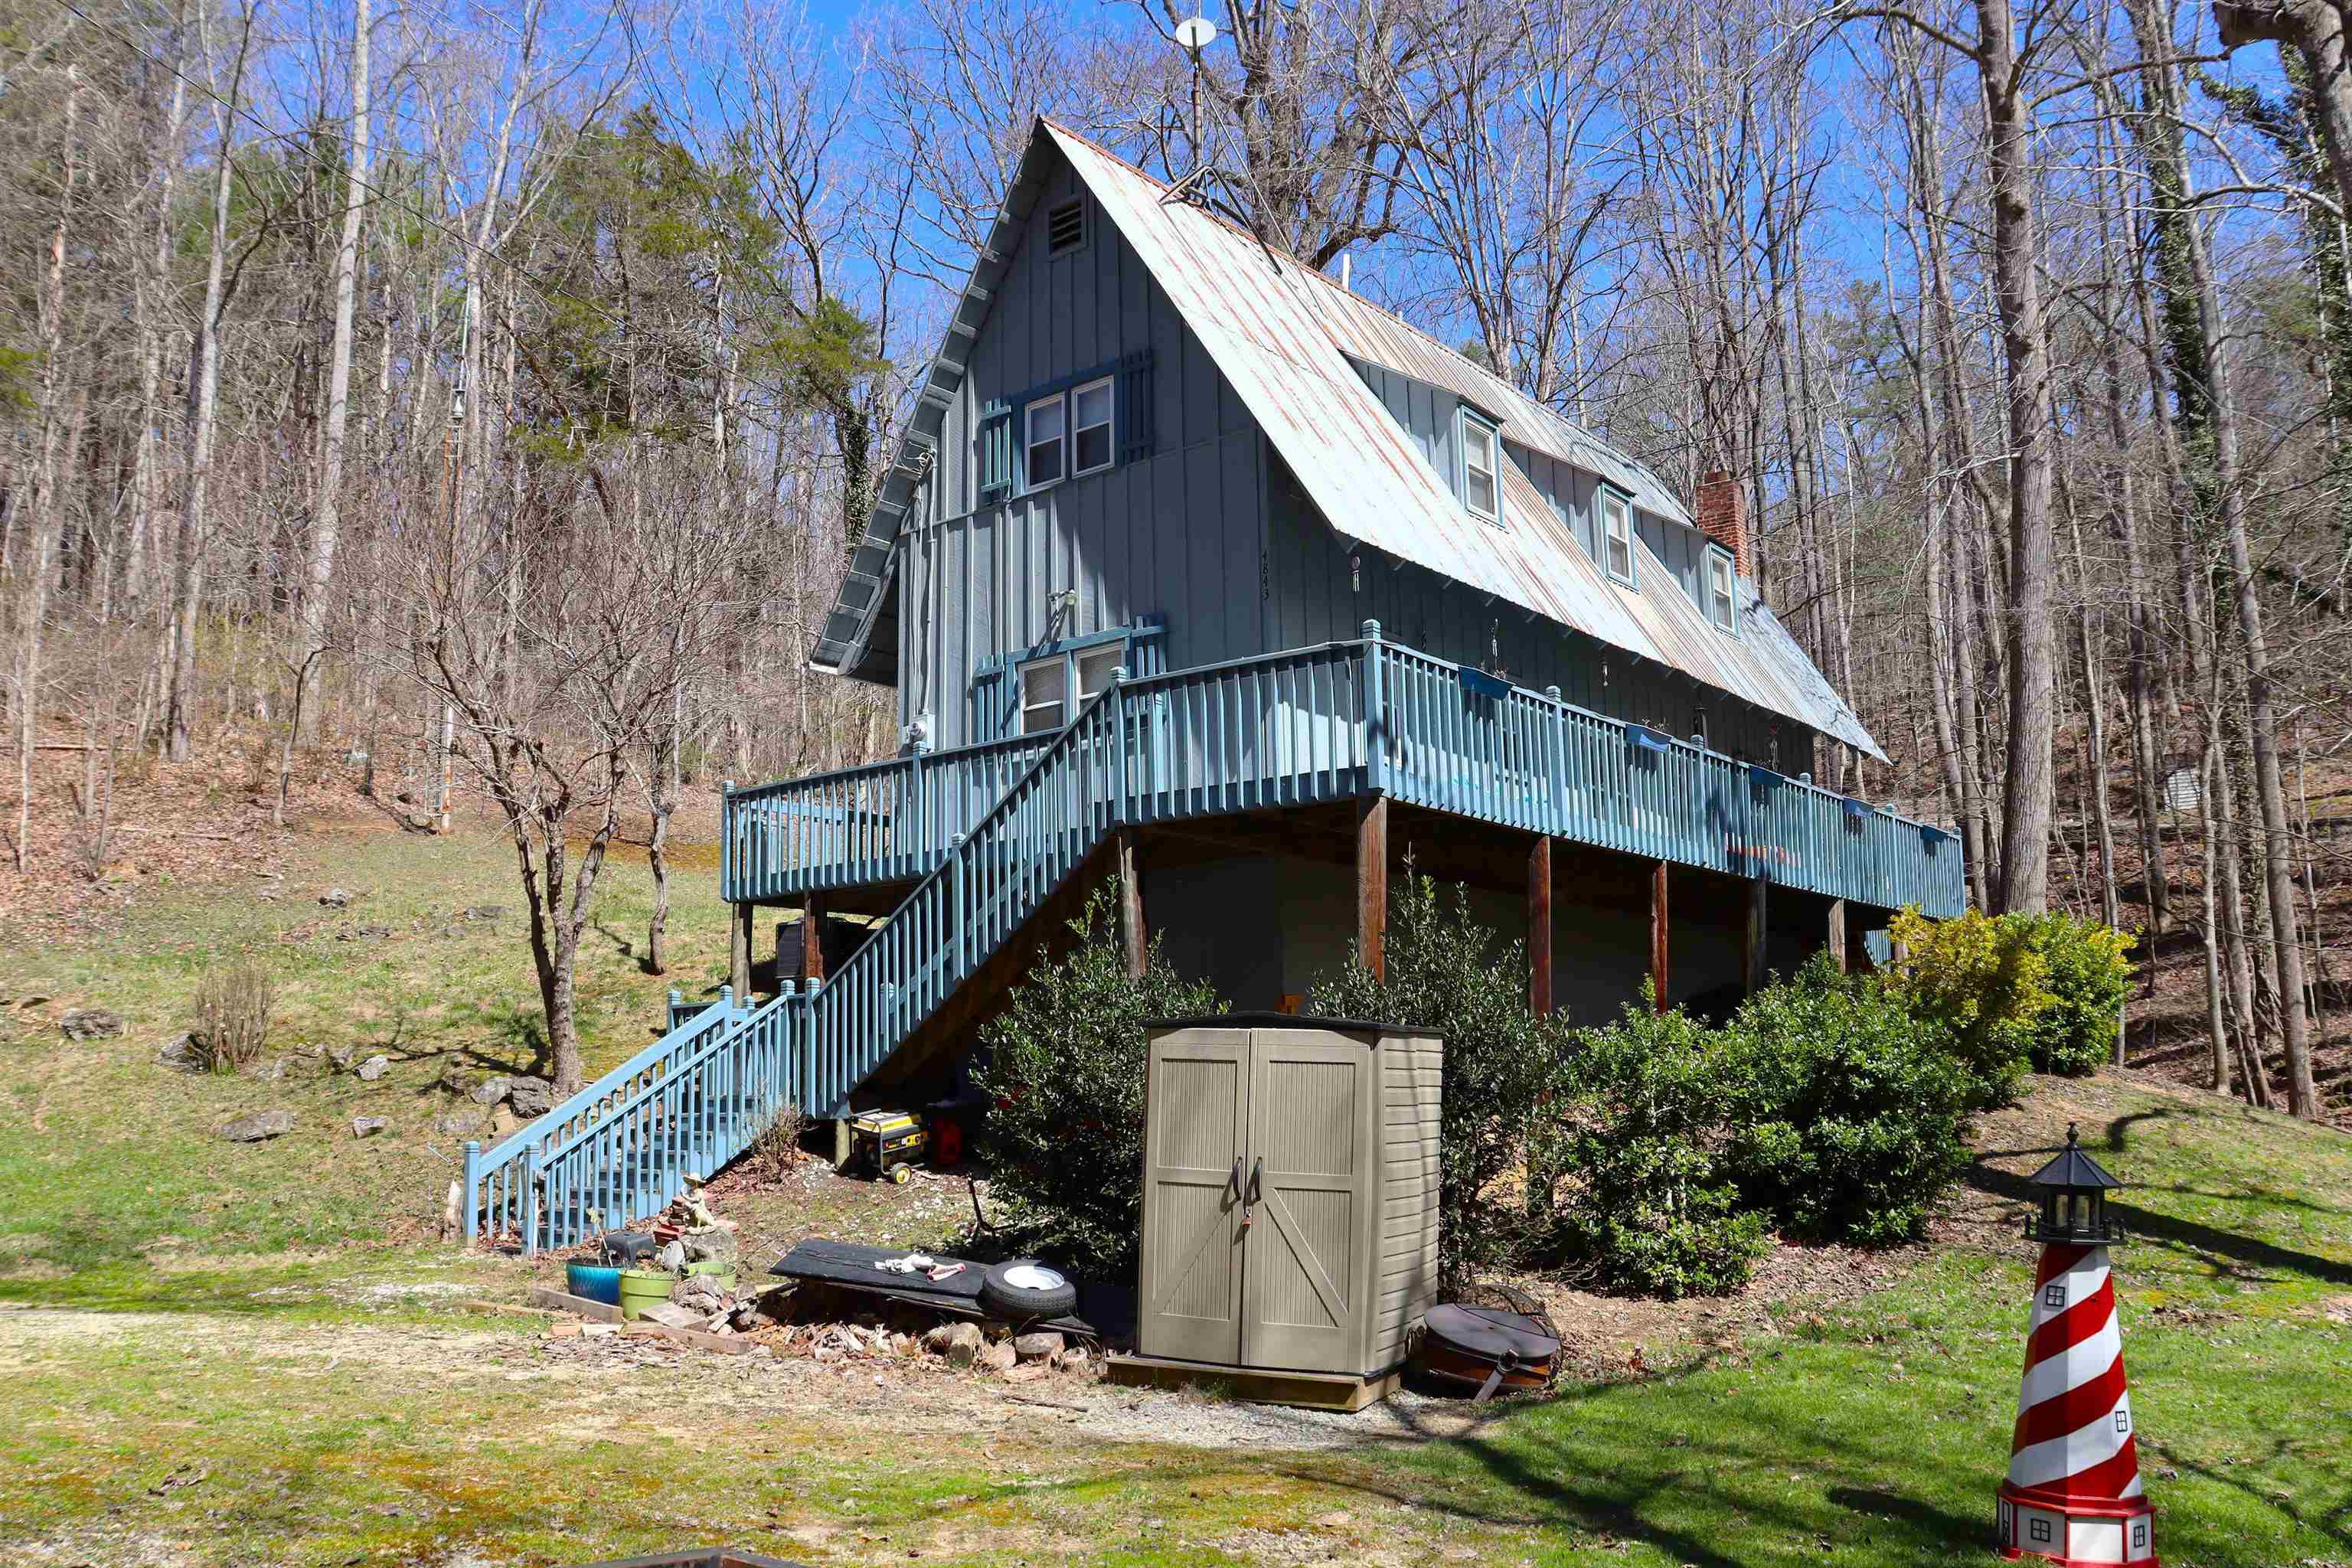 Rustic Waterfront home located only about 1 mile from I-81 interstate. Beautiful waterfront in the end of a cove. 3 bedrooms, 2 baths, living room with a fireplace, kitchen with eat at bar, wood cabinets, stove, refrigerator, and microwave. Large bedroom on the main level. Bath on the main level with a claw foot tub. Upper level offers 2 bedrooms, bath, office area, and a small setting area. Great views of the waterfront from the wrap around decks, Very large 16 x 16 rear wooden deck for cookouts. Part basement for storage with a dirt floor.